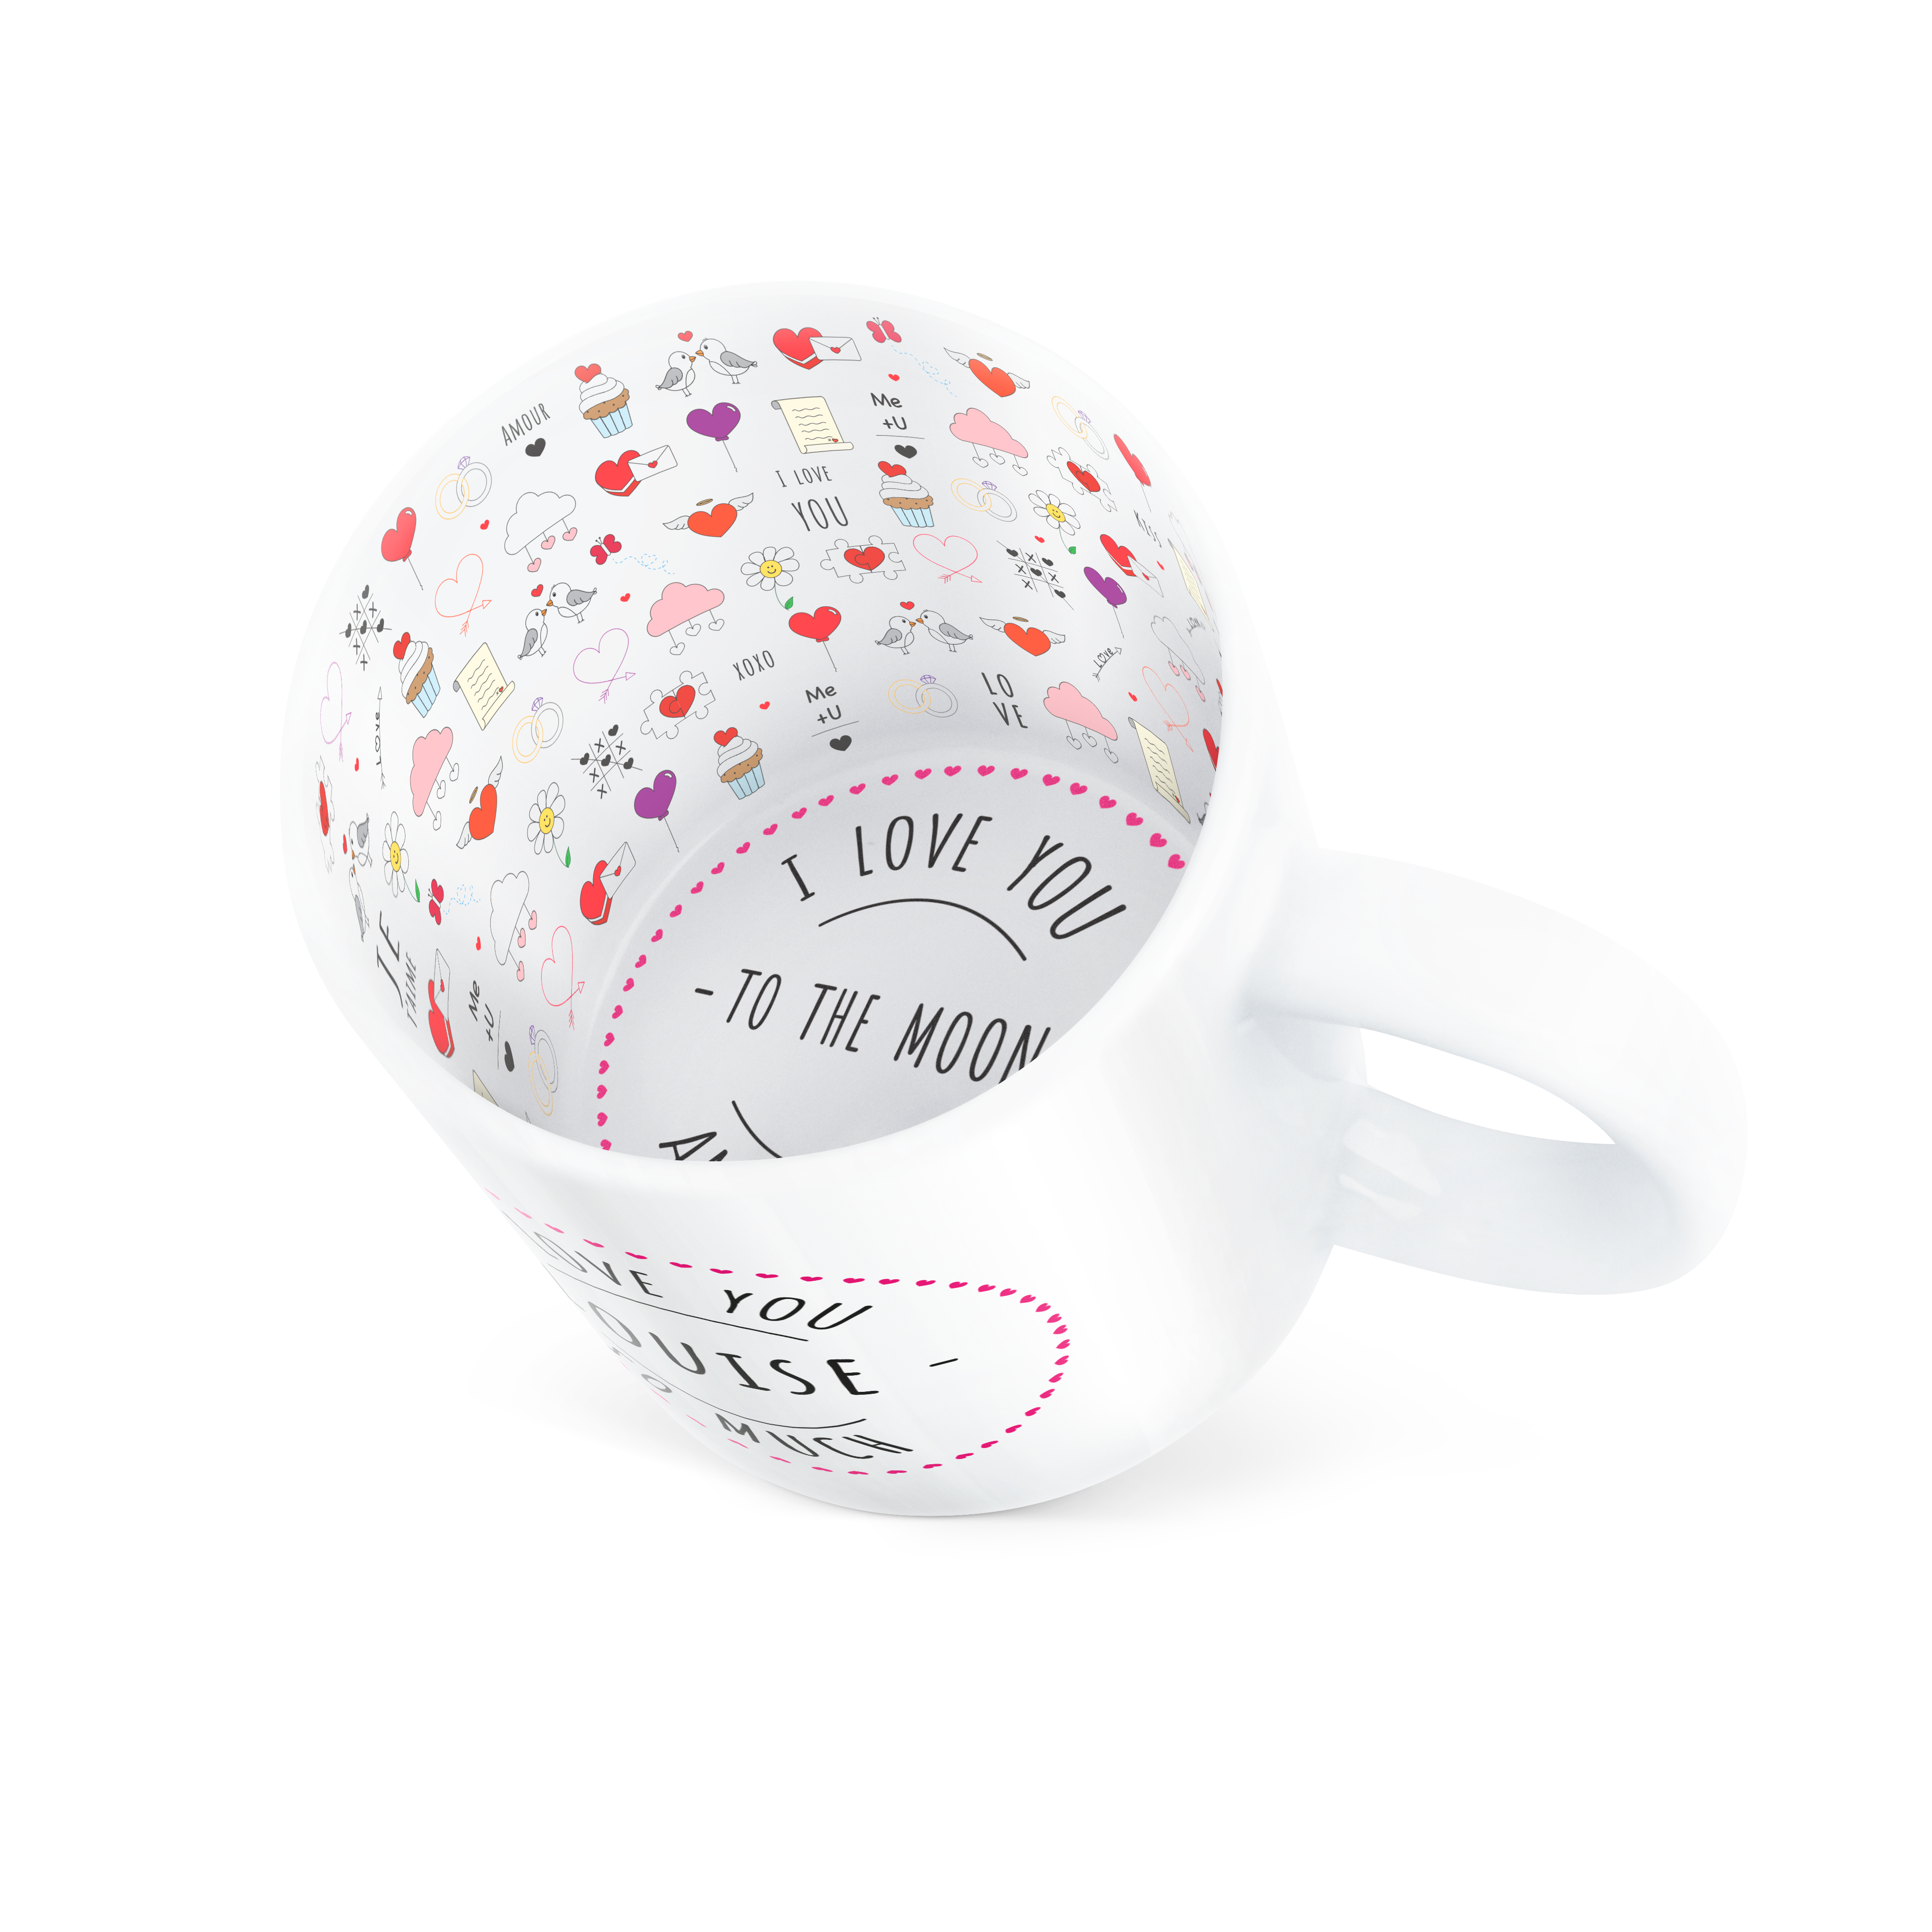 Personalised Mug - Love - Special Edition